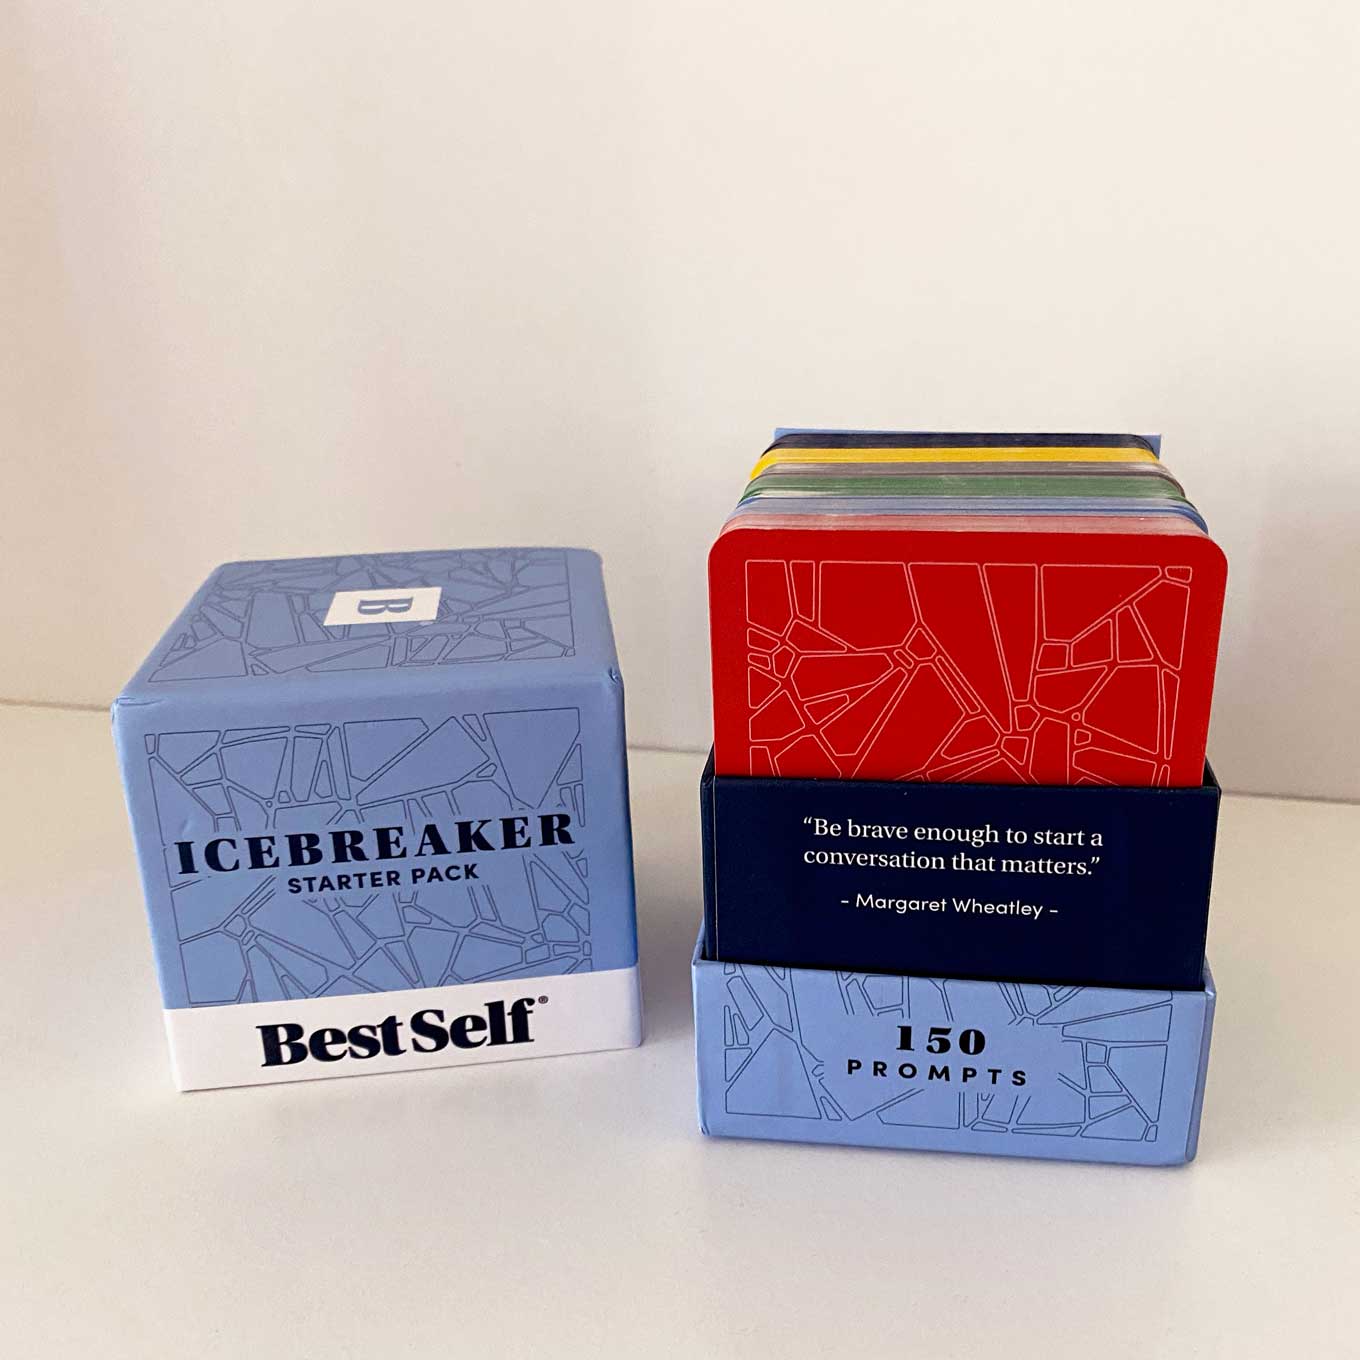 Box for Best Self Co. with the words: Icebreaker Starter Pack / 150 Prompts / "Be brave enough to start a conversation that matters."  — Margaret Wheatley